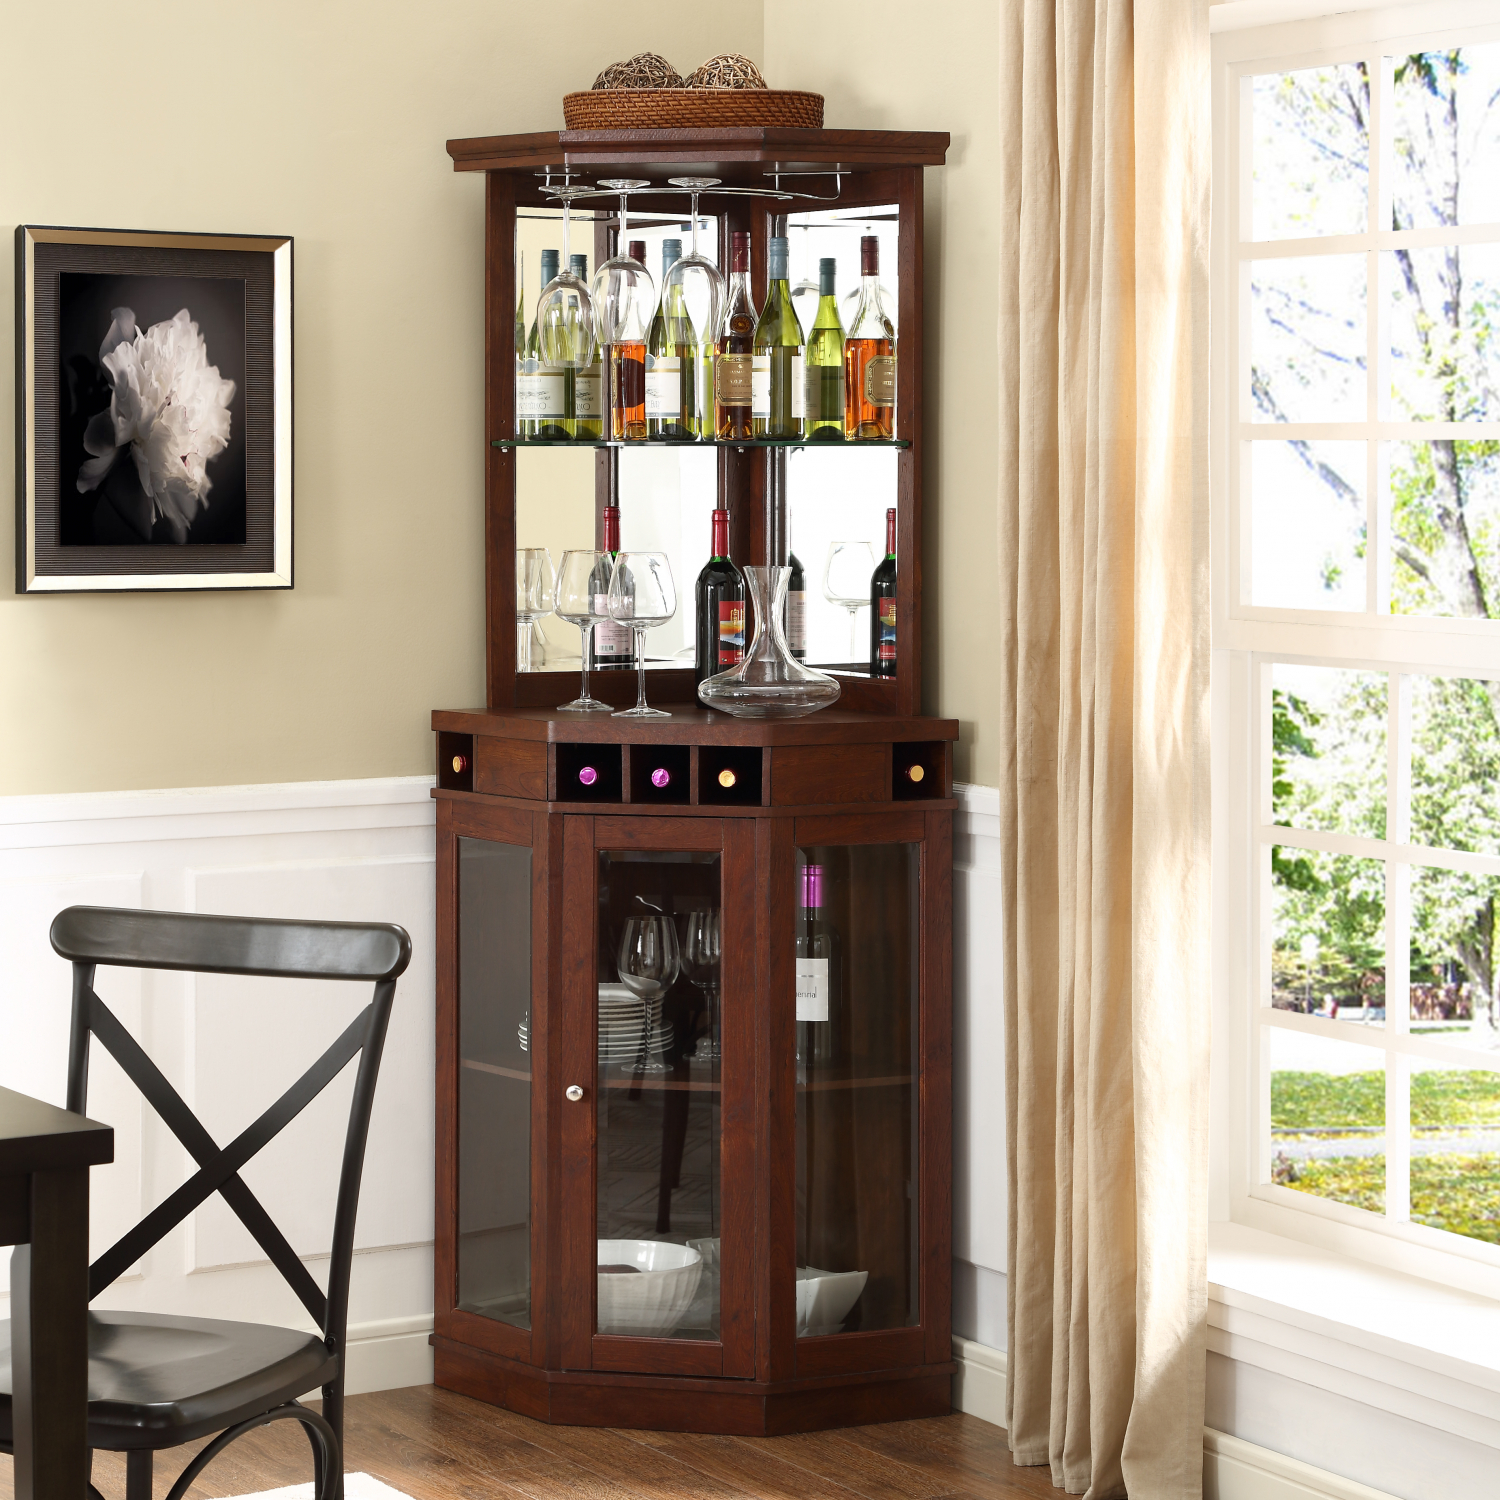 Details About Mini Bars Liquor Cabinet Whiskey Cabinets Wine Storage Wooden Home Bar Furniture regarding sizing 1500 X 1500